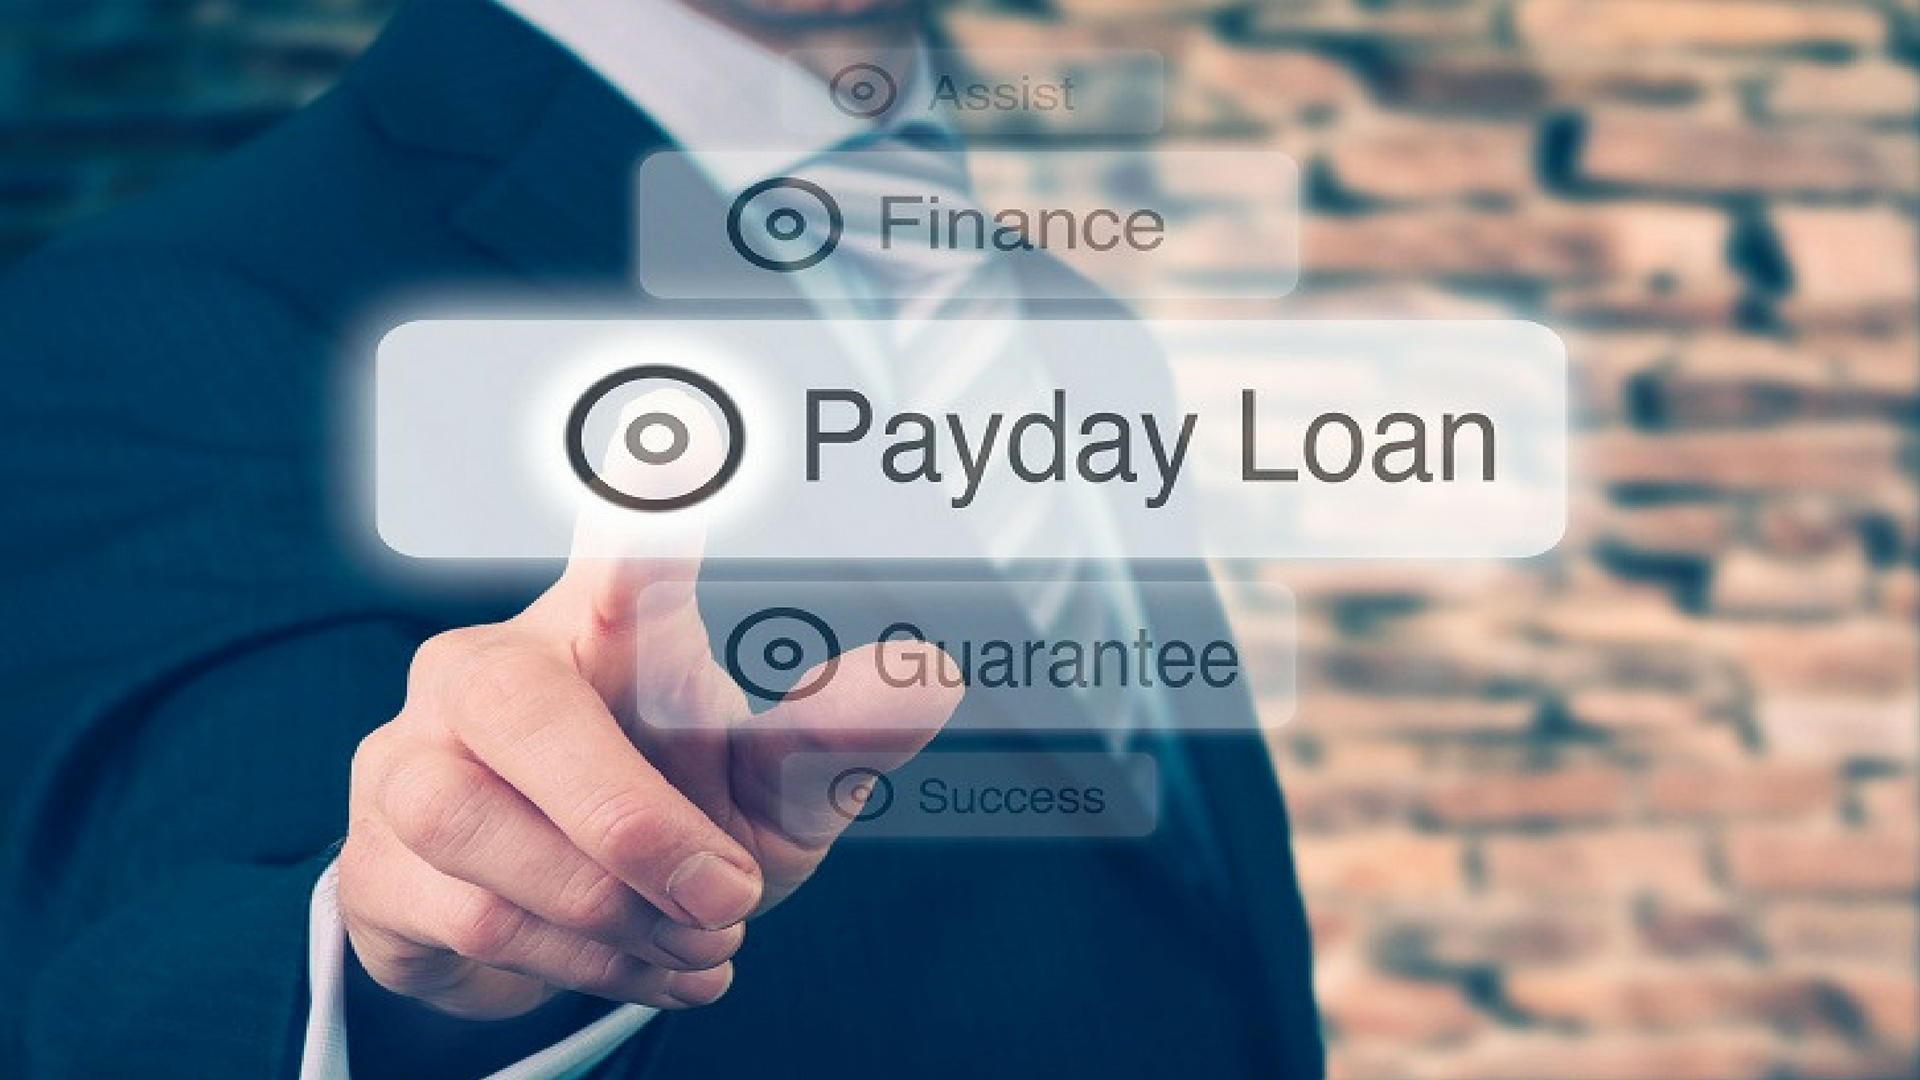 Bad Credit? Get A Payday Cash Advance Loan With No Credit Check